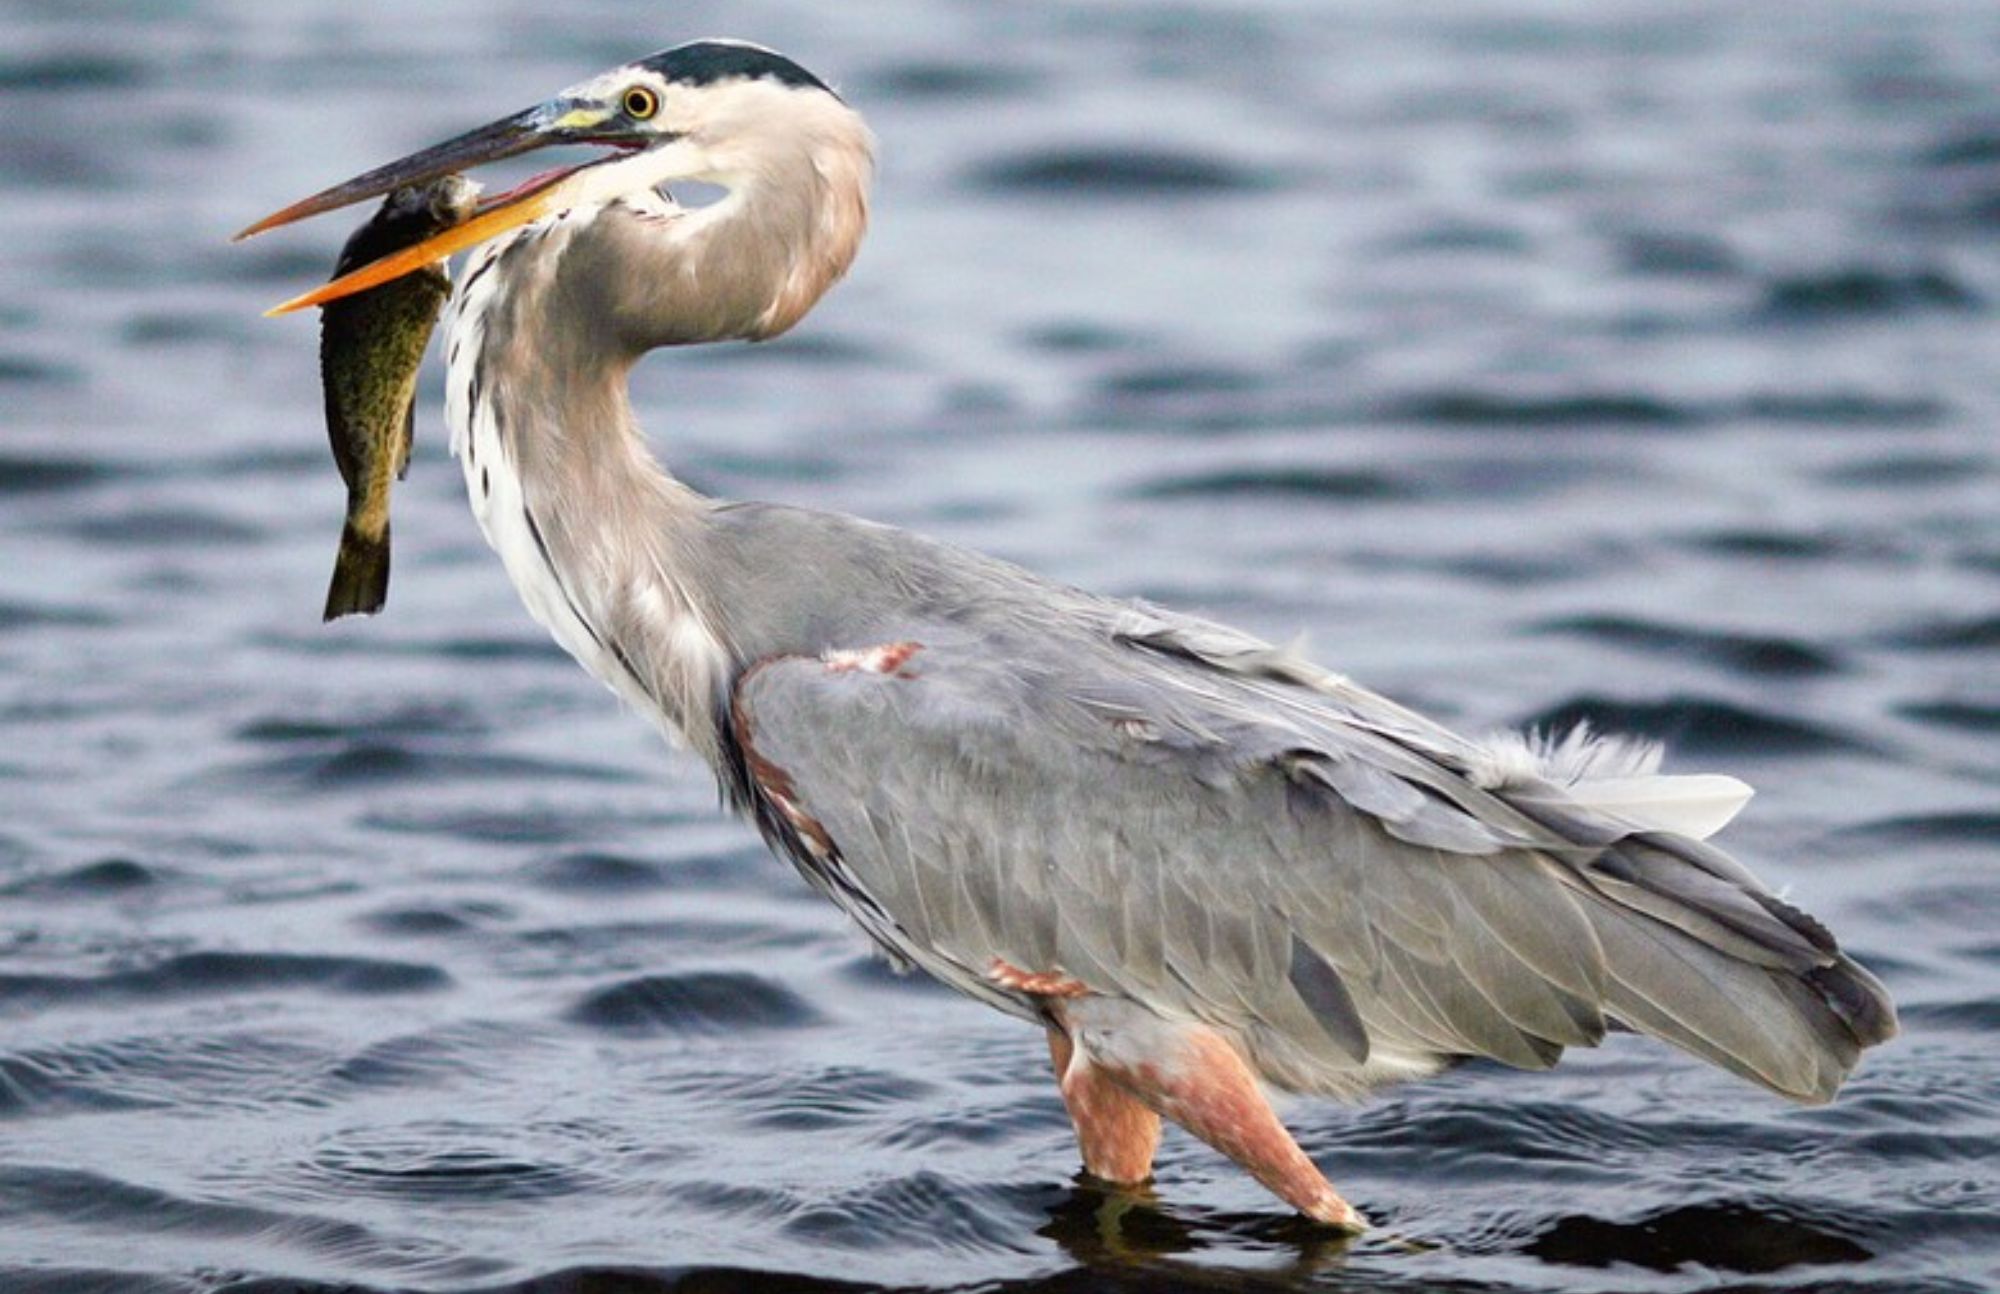 The great blue heron catches a fish on its long beak in the middle of the water